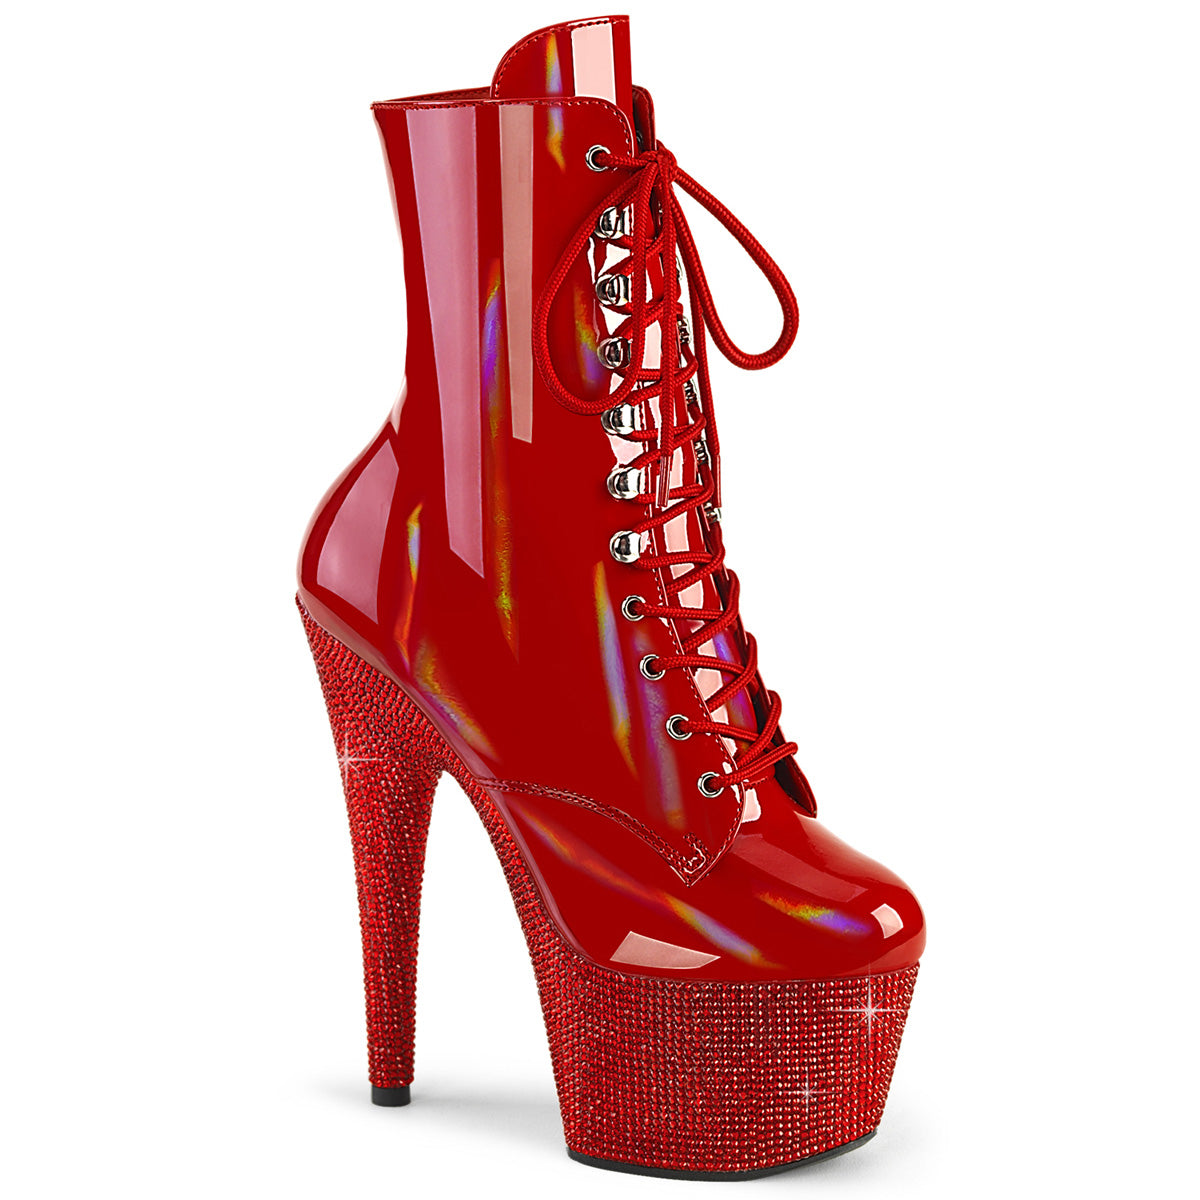 BEJEWELED-1020-7 Calf High Boots Red Multi view 1